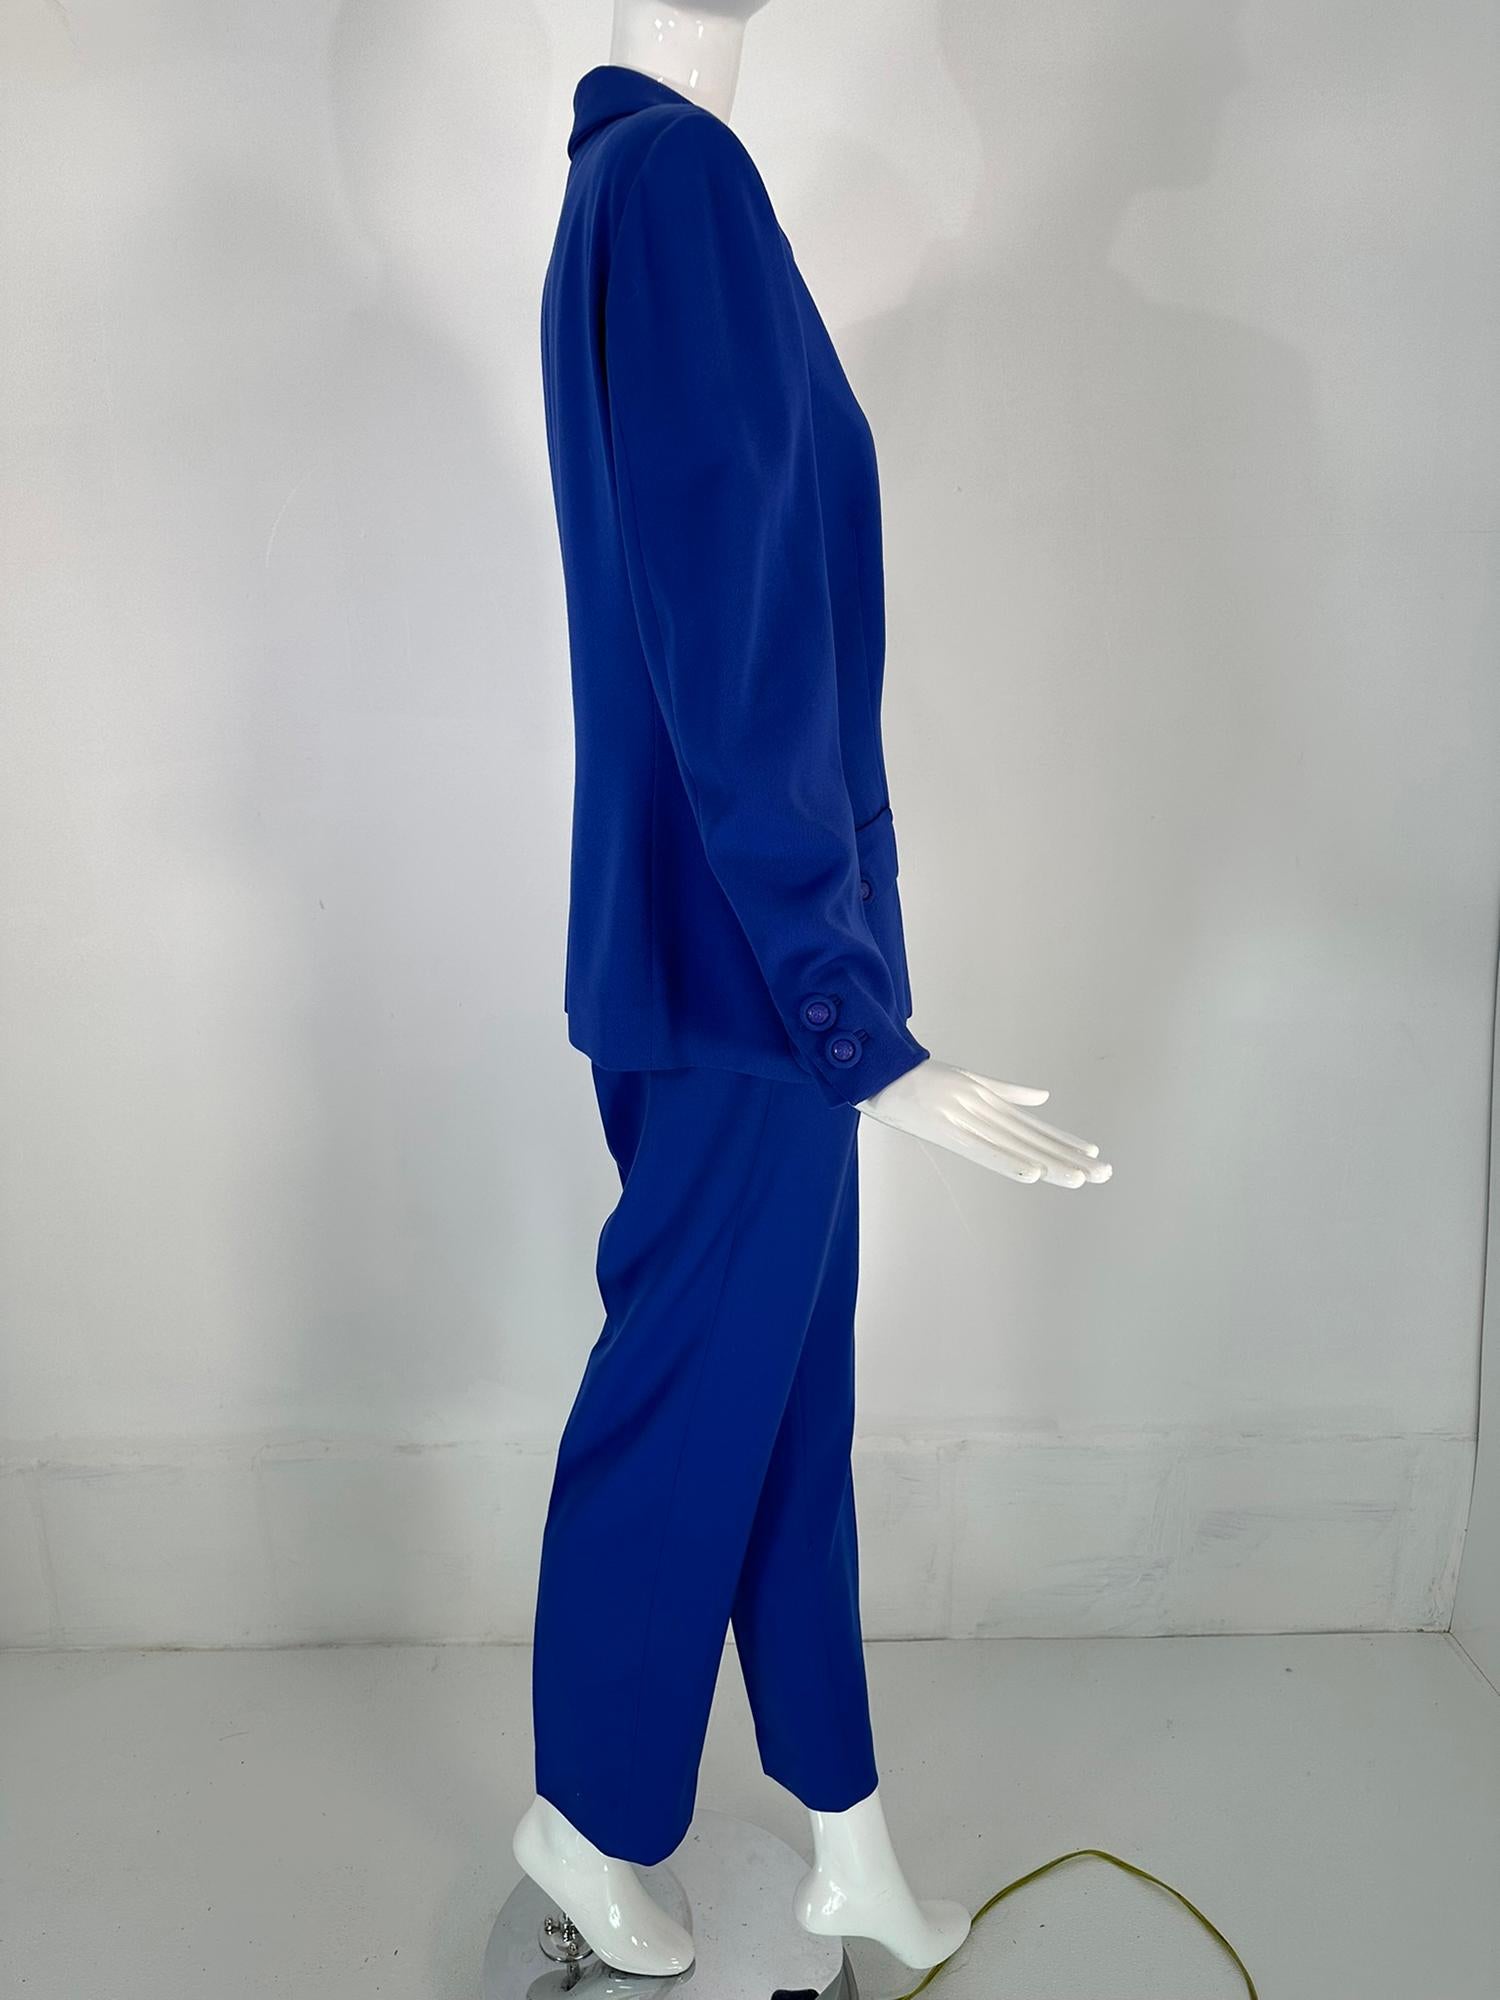 Gianni Versace Couture F/W 1995 Royal Blue Wool Pant Suit  For Sale 5